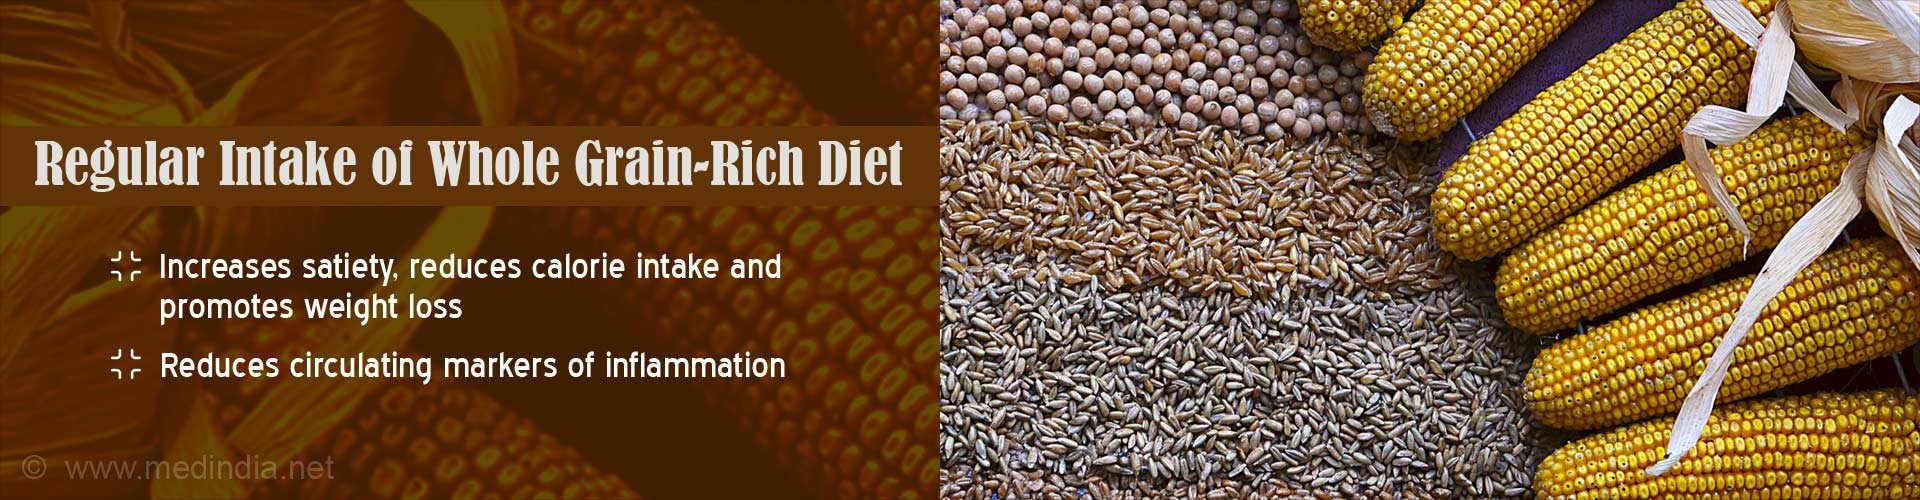 Regular intake of whole grain-rich diet
- increases satiety, reduces calorie intake and promotes weight loss
- reduces circulating markers of inflammation